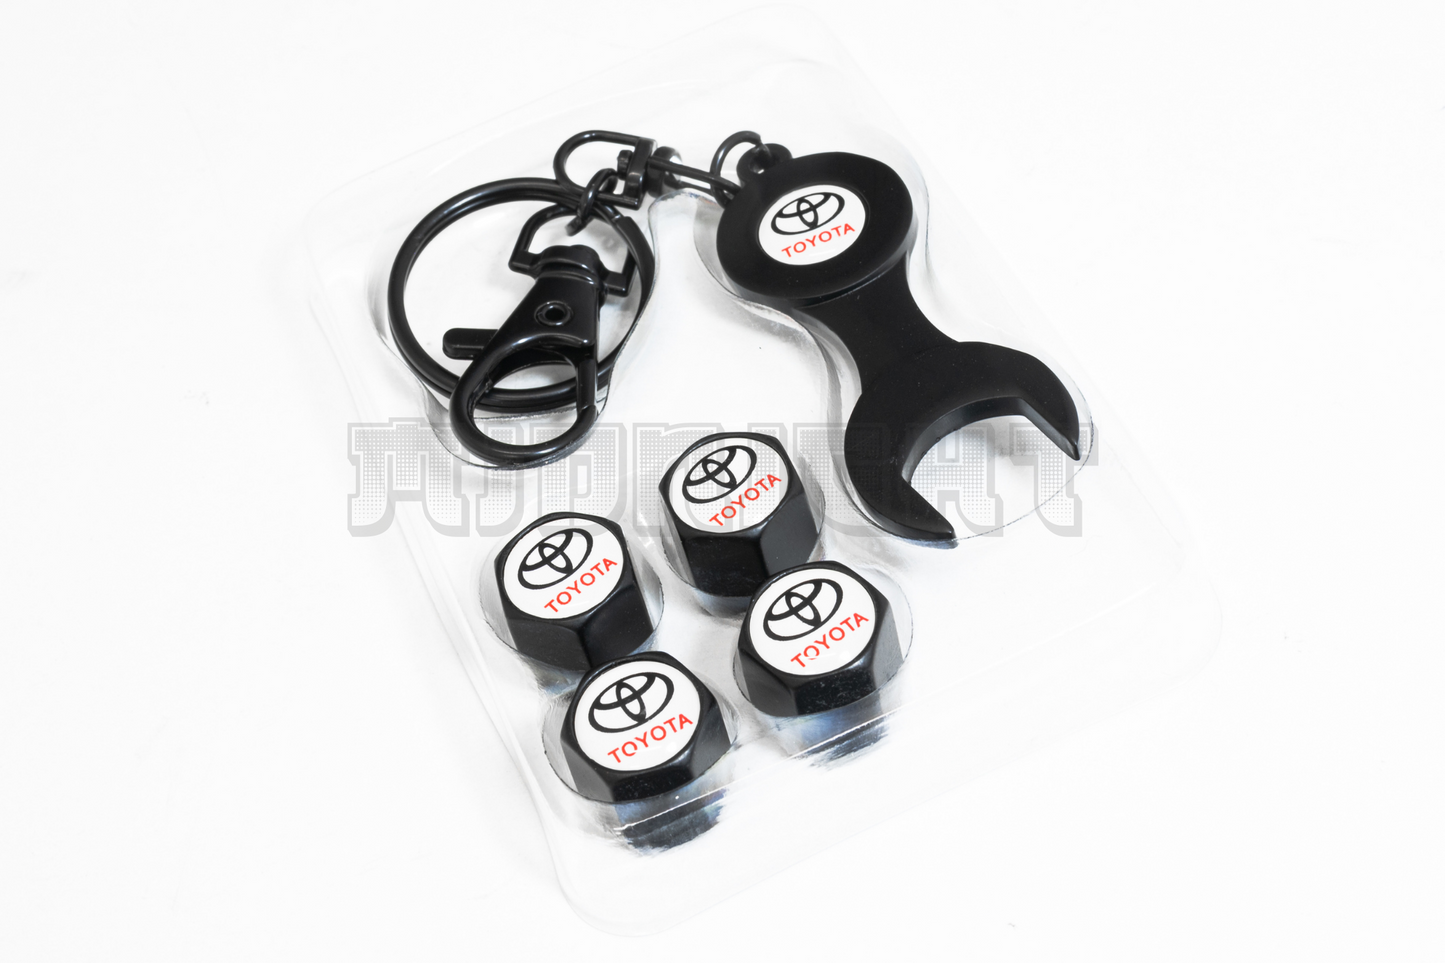 Toyota Valve Stem Caps With Wrench Keychain